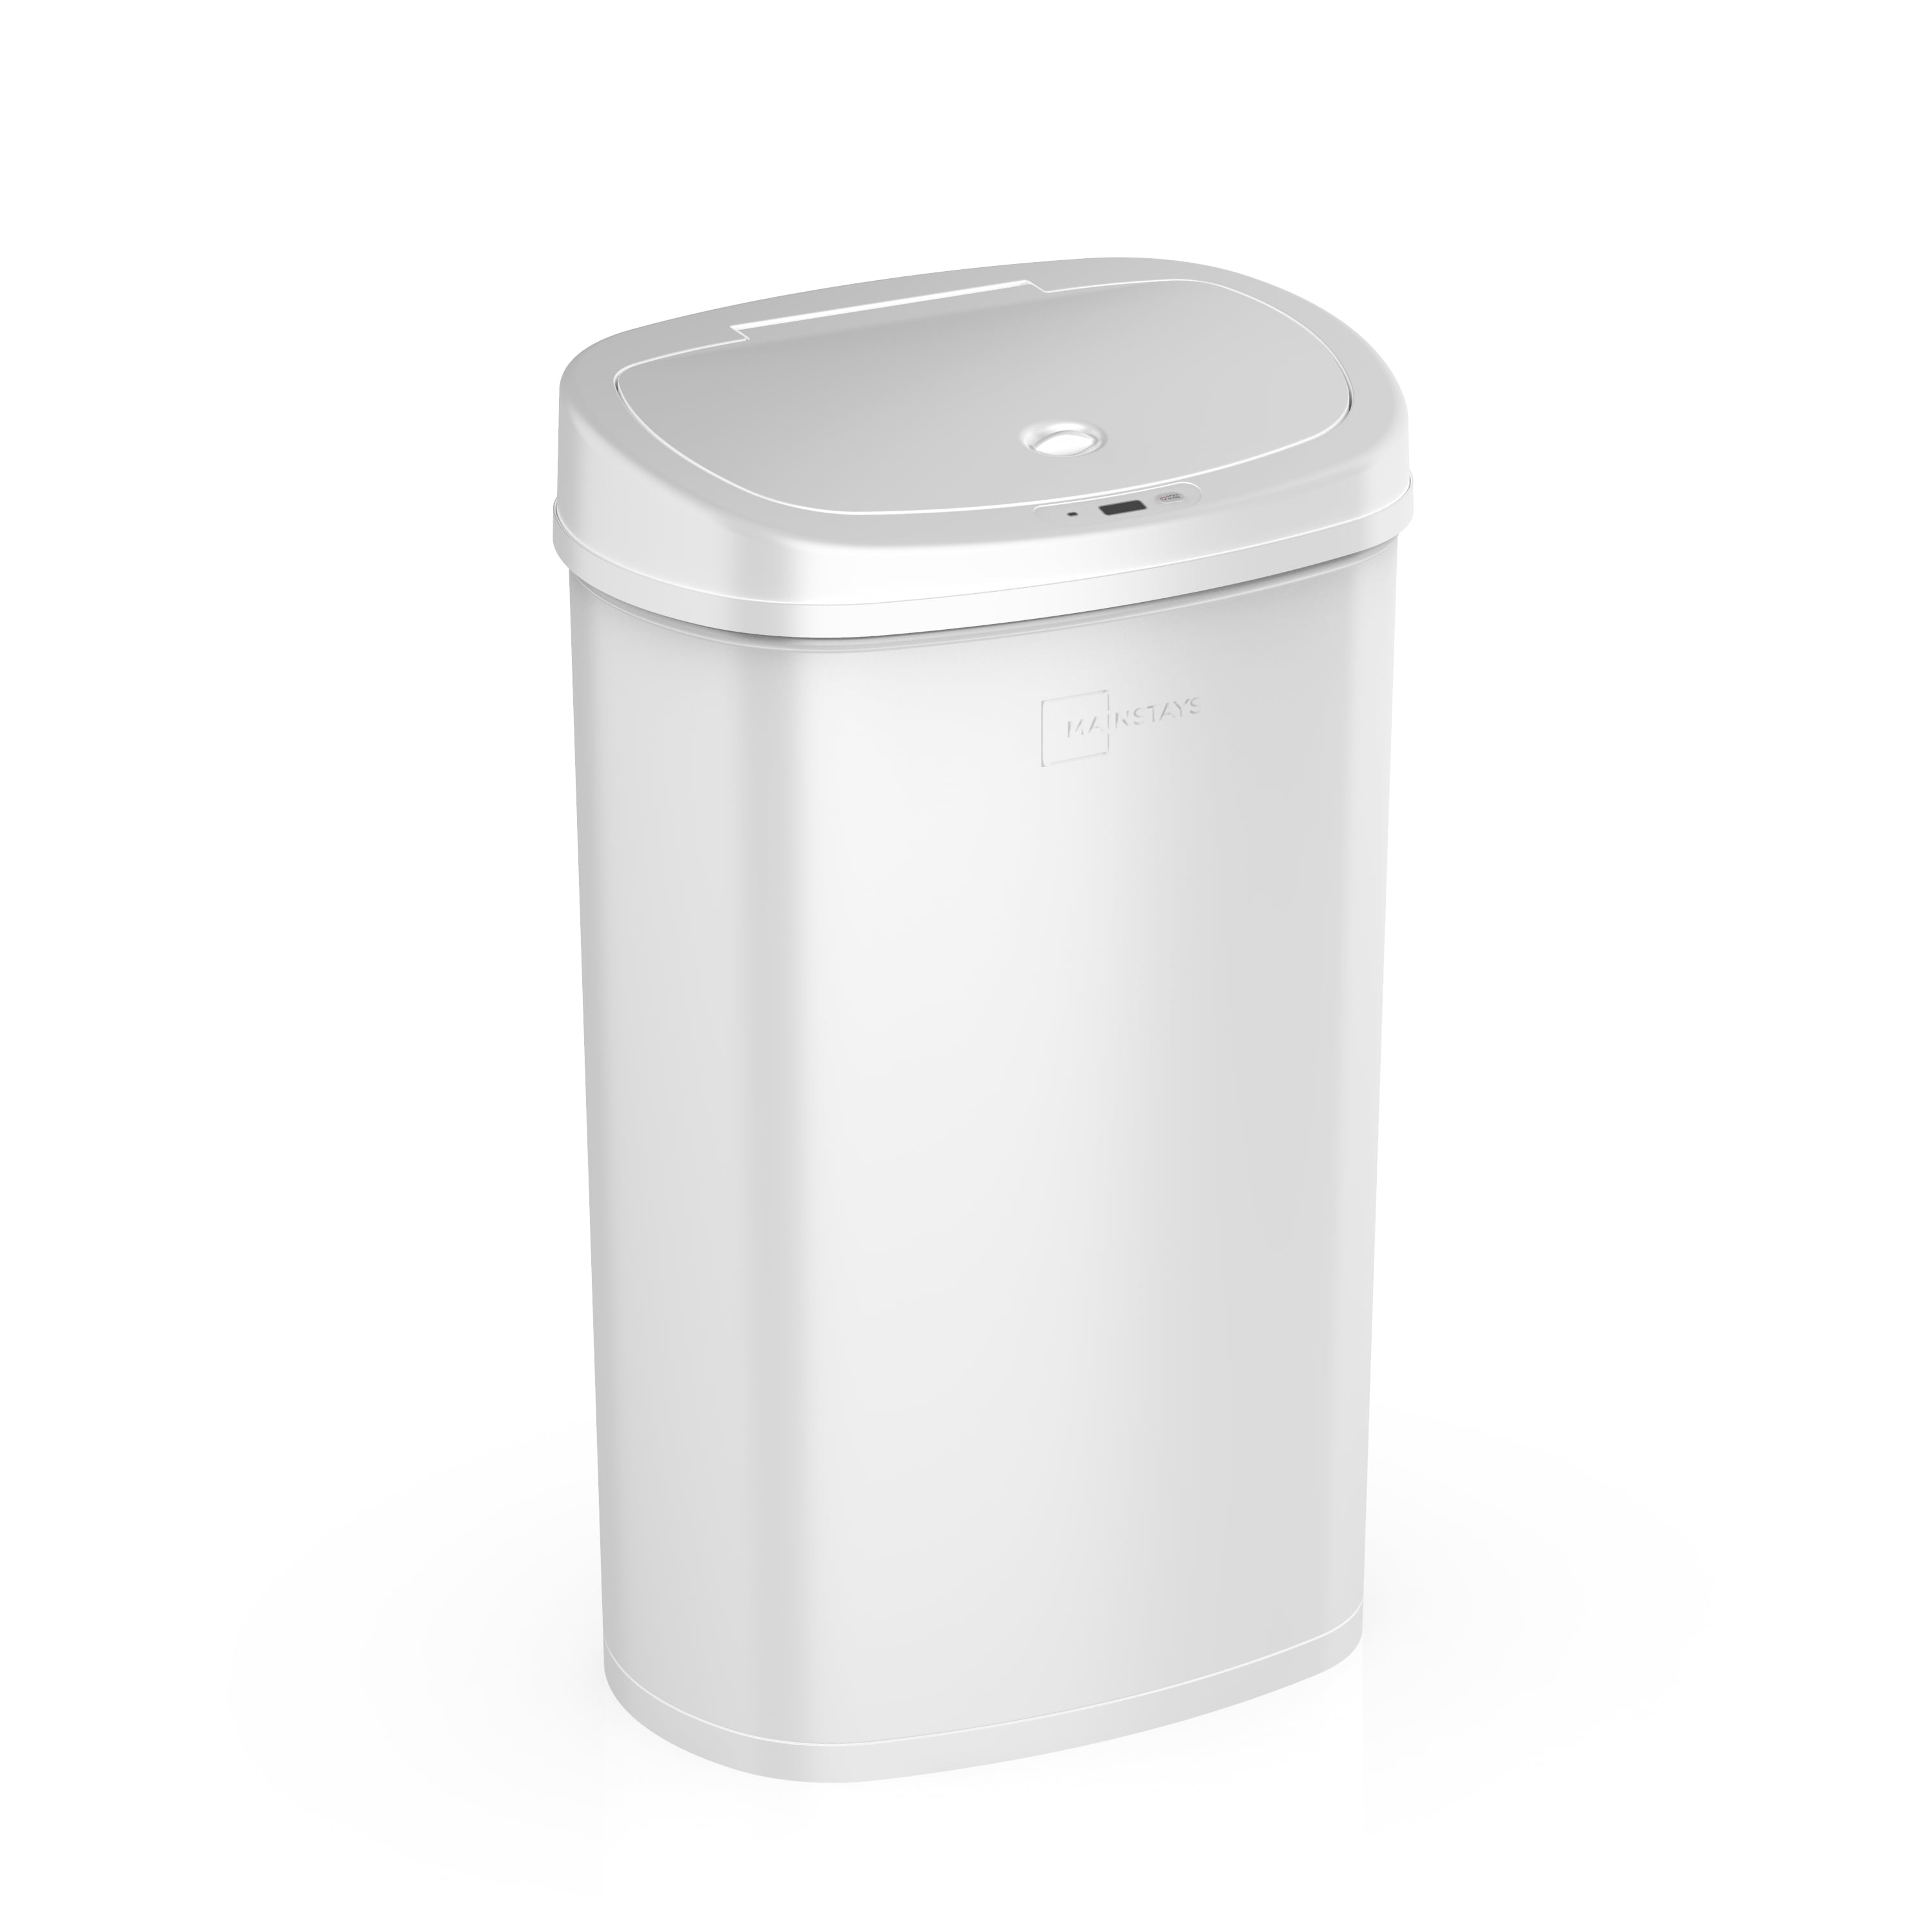 SANIWISE Automatic Sensor Trash Can with Lid 50 Liter/13 Gallon Stainl –  Saniwise